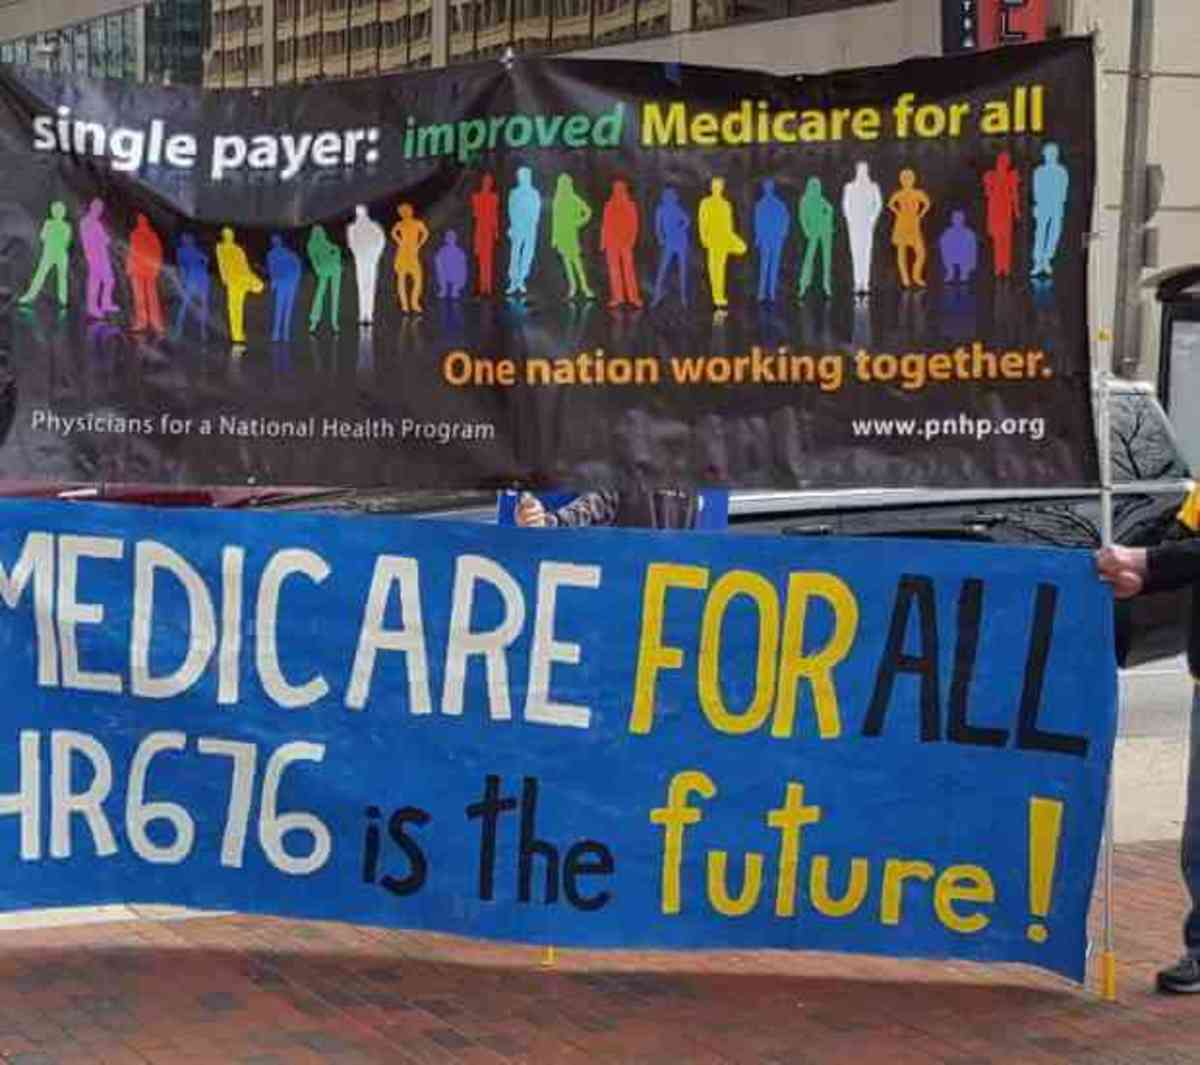 Getting National Improved Medicare for All